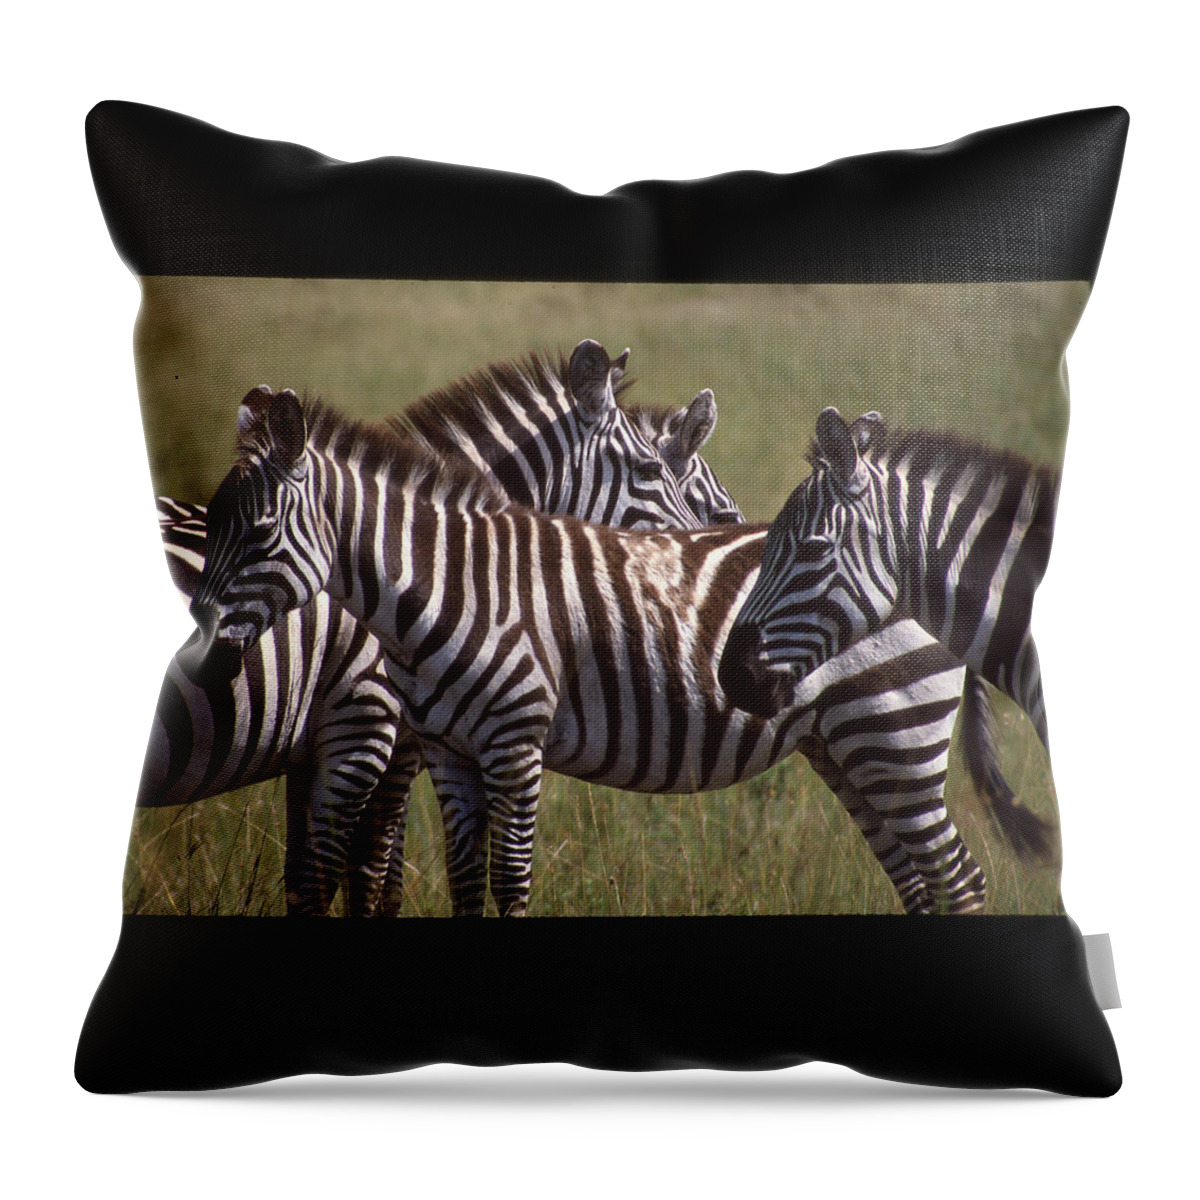 Africa Throw Pillow featuring the photograph Zebras Look Alike by Russ Considine